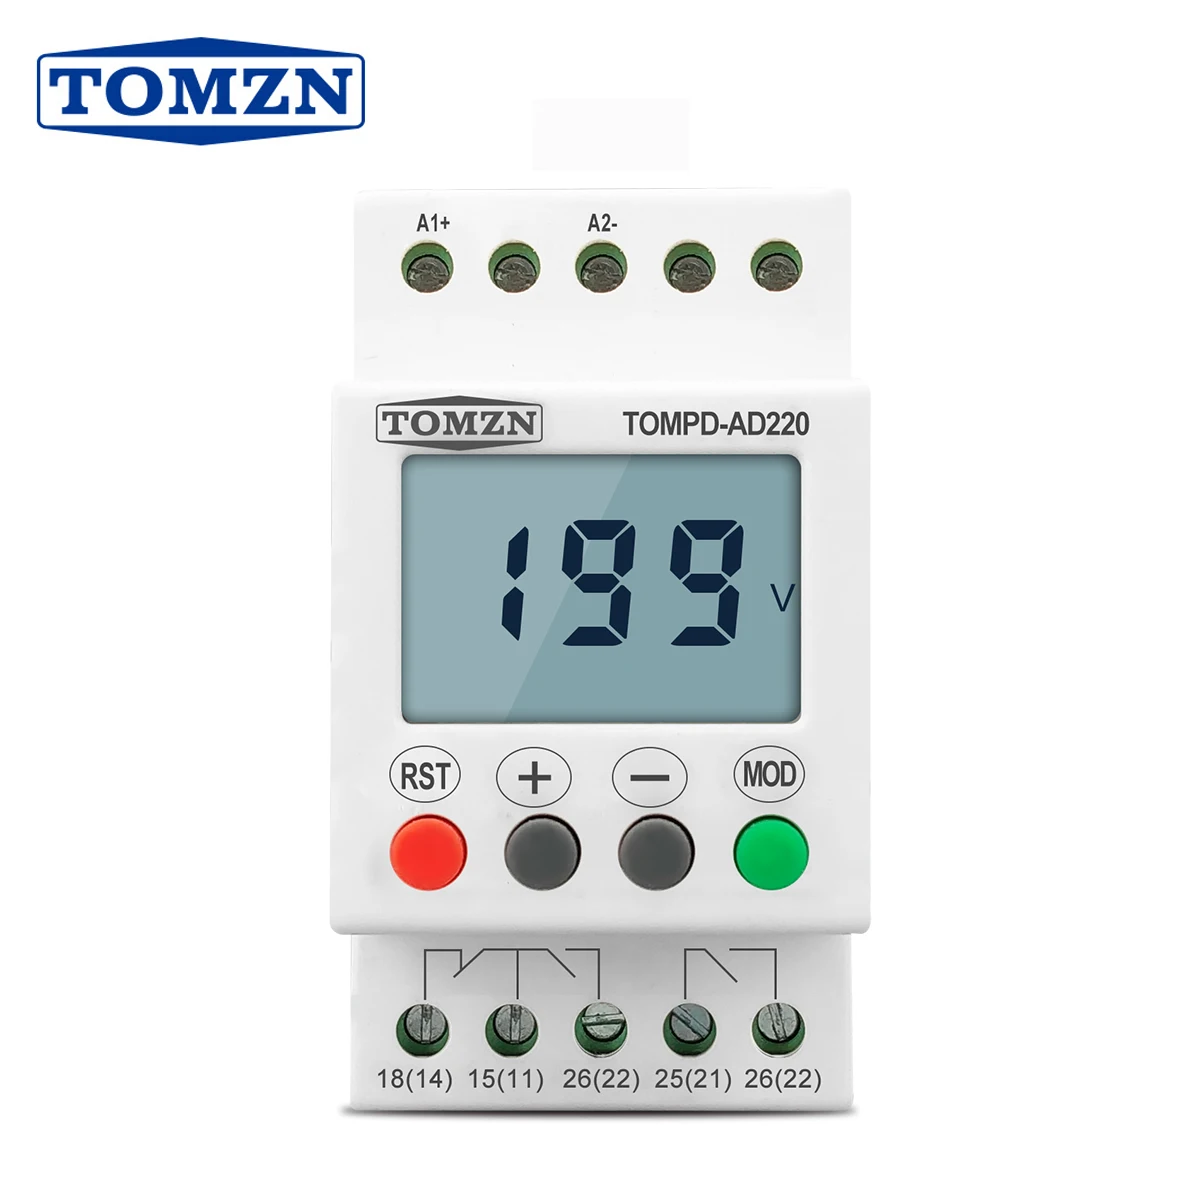 AC DC 110V-240V TOMZN DIN rail over and under voltage protection monitoring relays protector